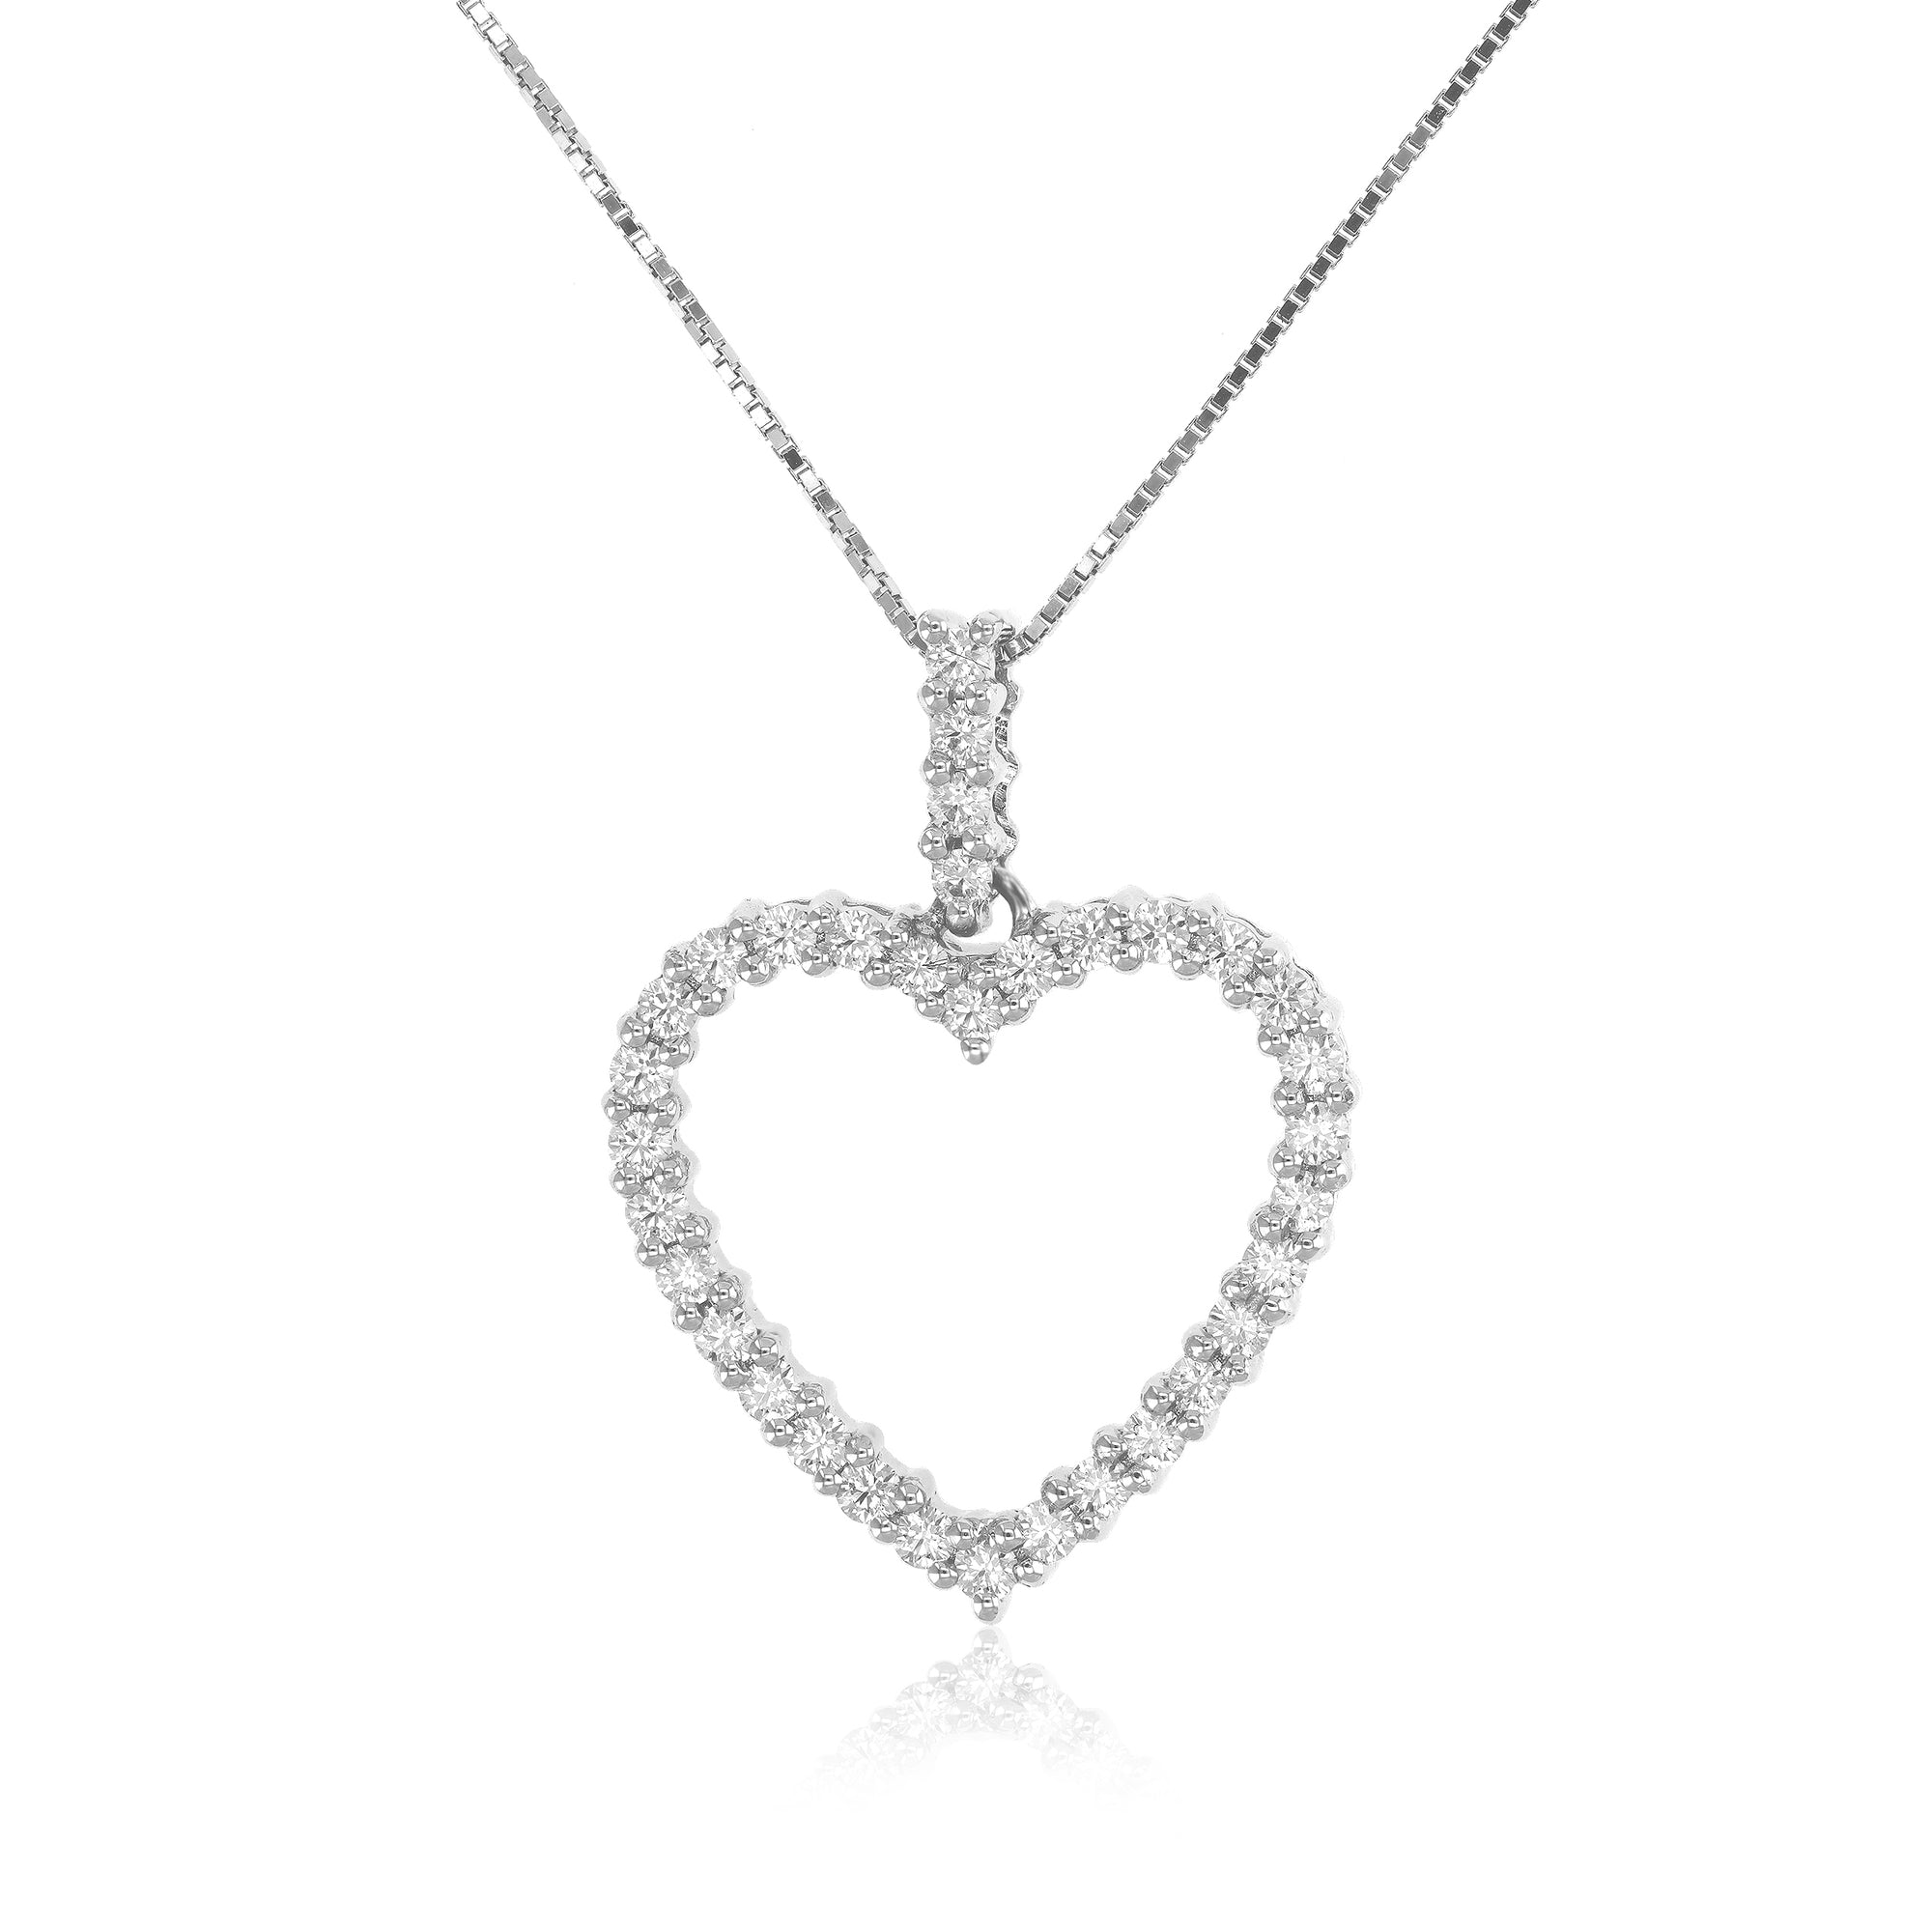 5/8 cttw Diamond Pendant, Diamond Heart Pendant Necklace for Women in 18K White Gold with 18 Inch Chain, Prong Setting